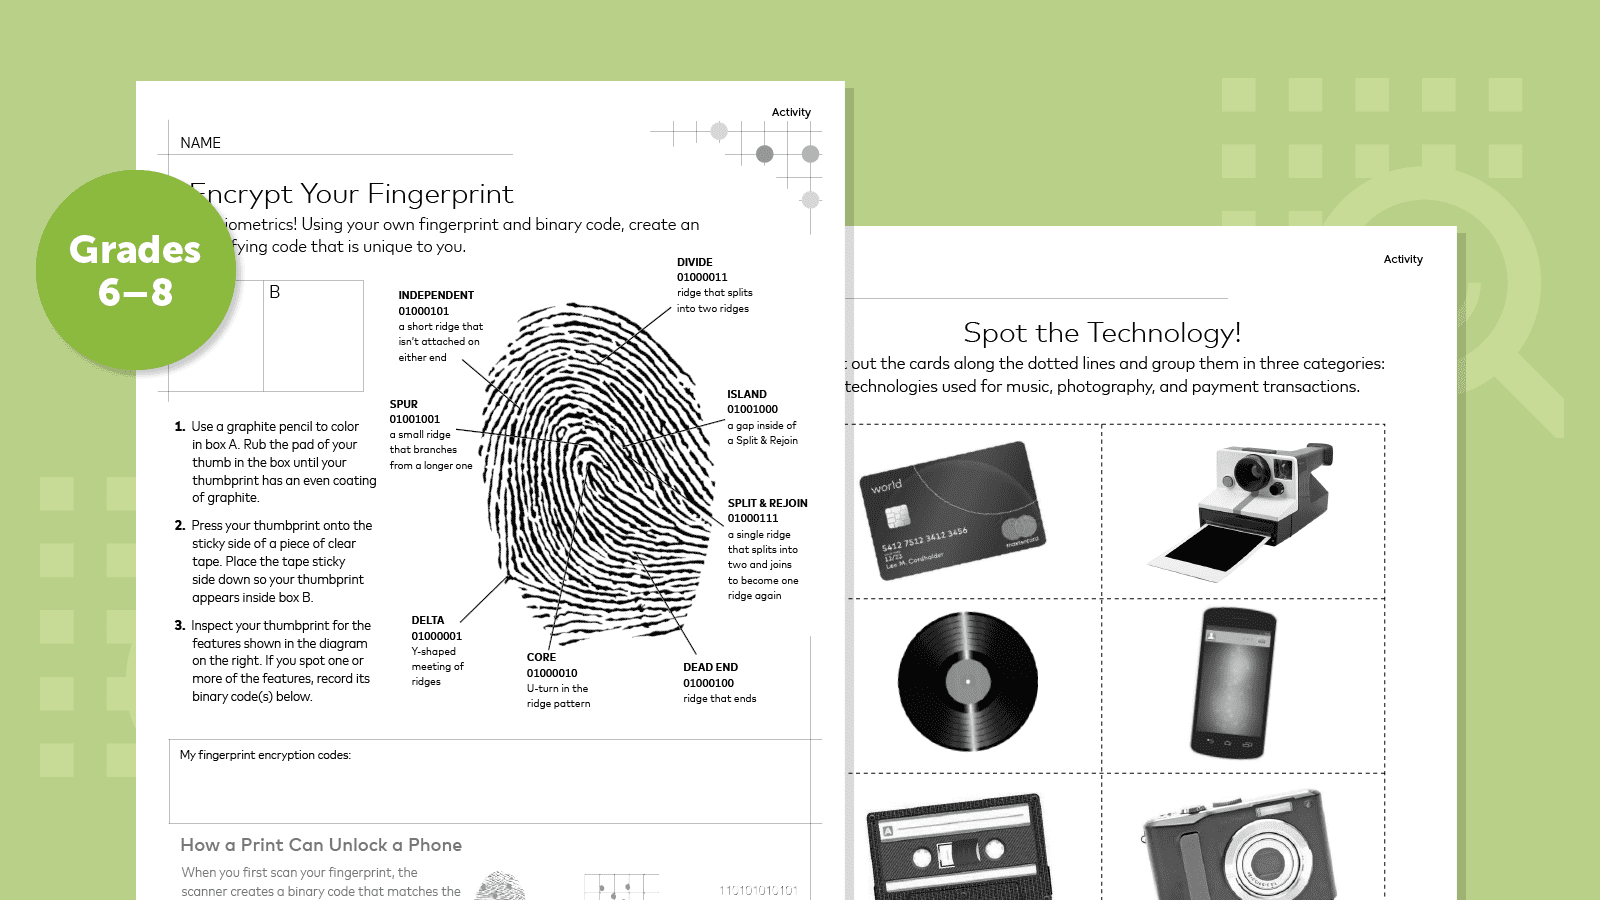 (opens in a new tab) Lesson Plan & Activity: Encrypt Your Fingerprint